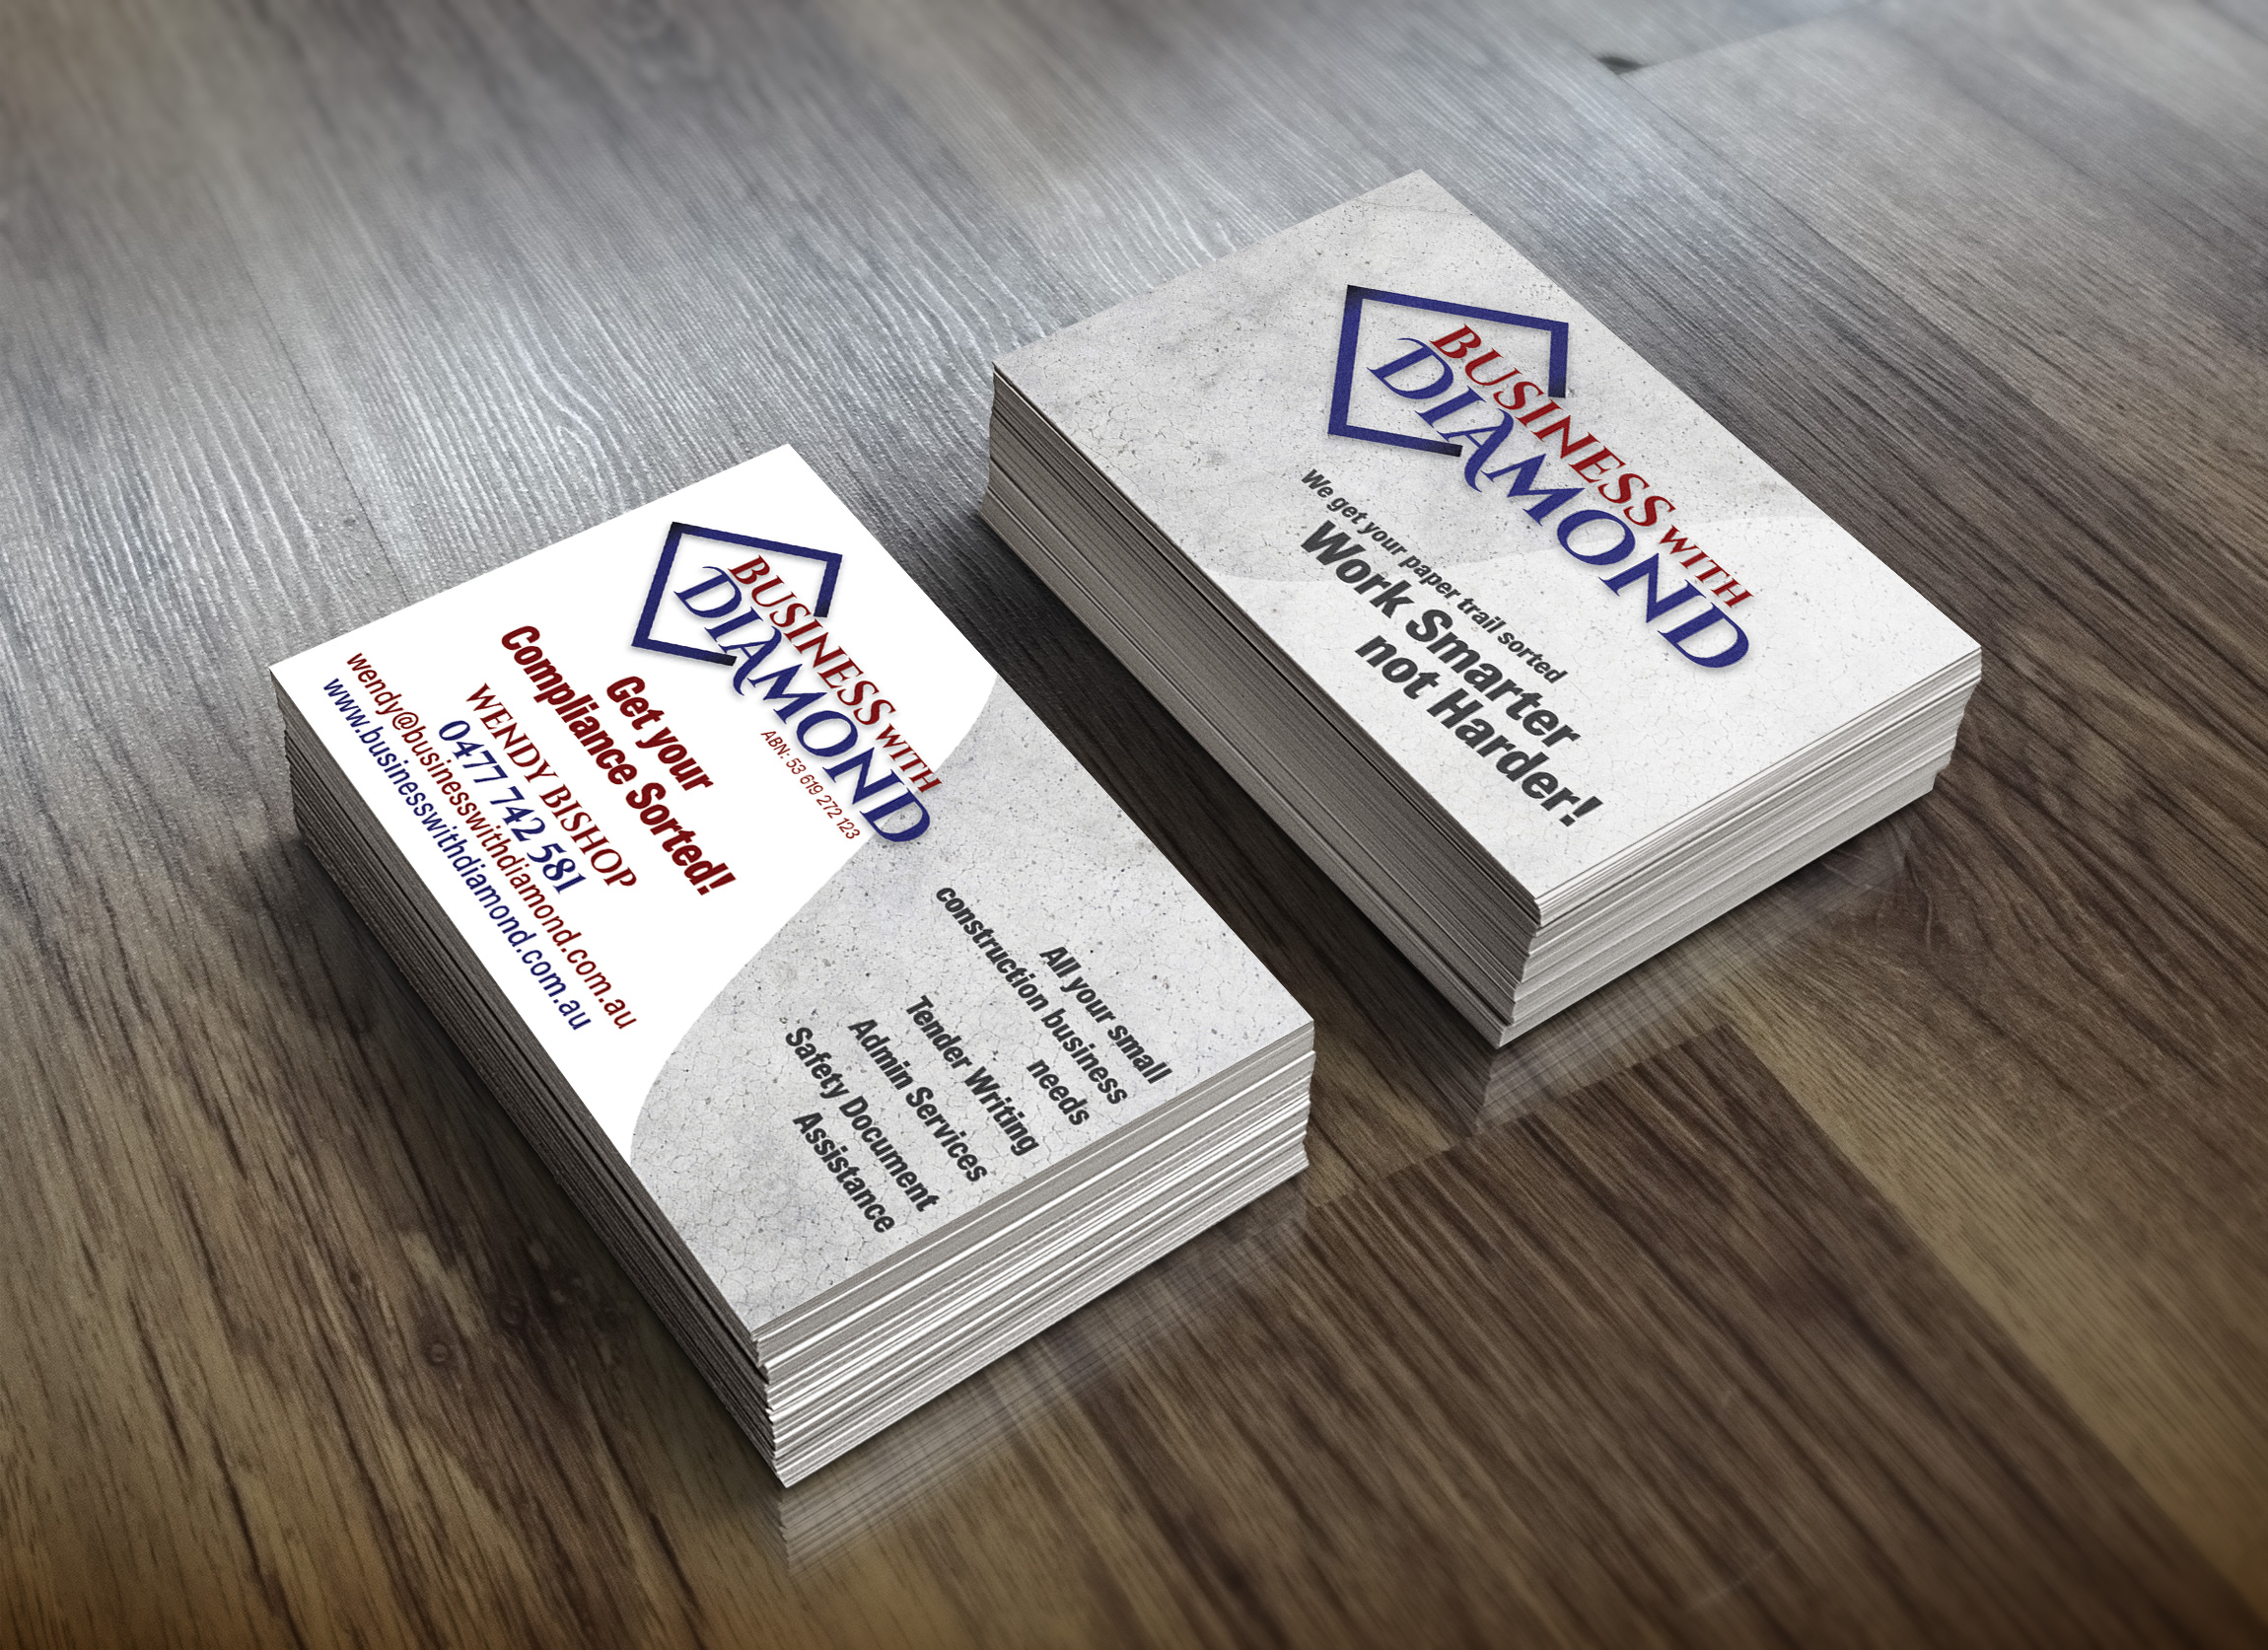 APAP Events Event Management and Graphic Design Rockhampton Business with Diamond Business Card Design